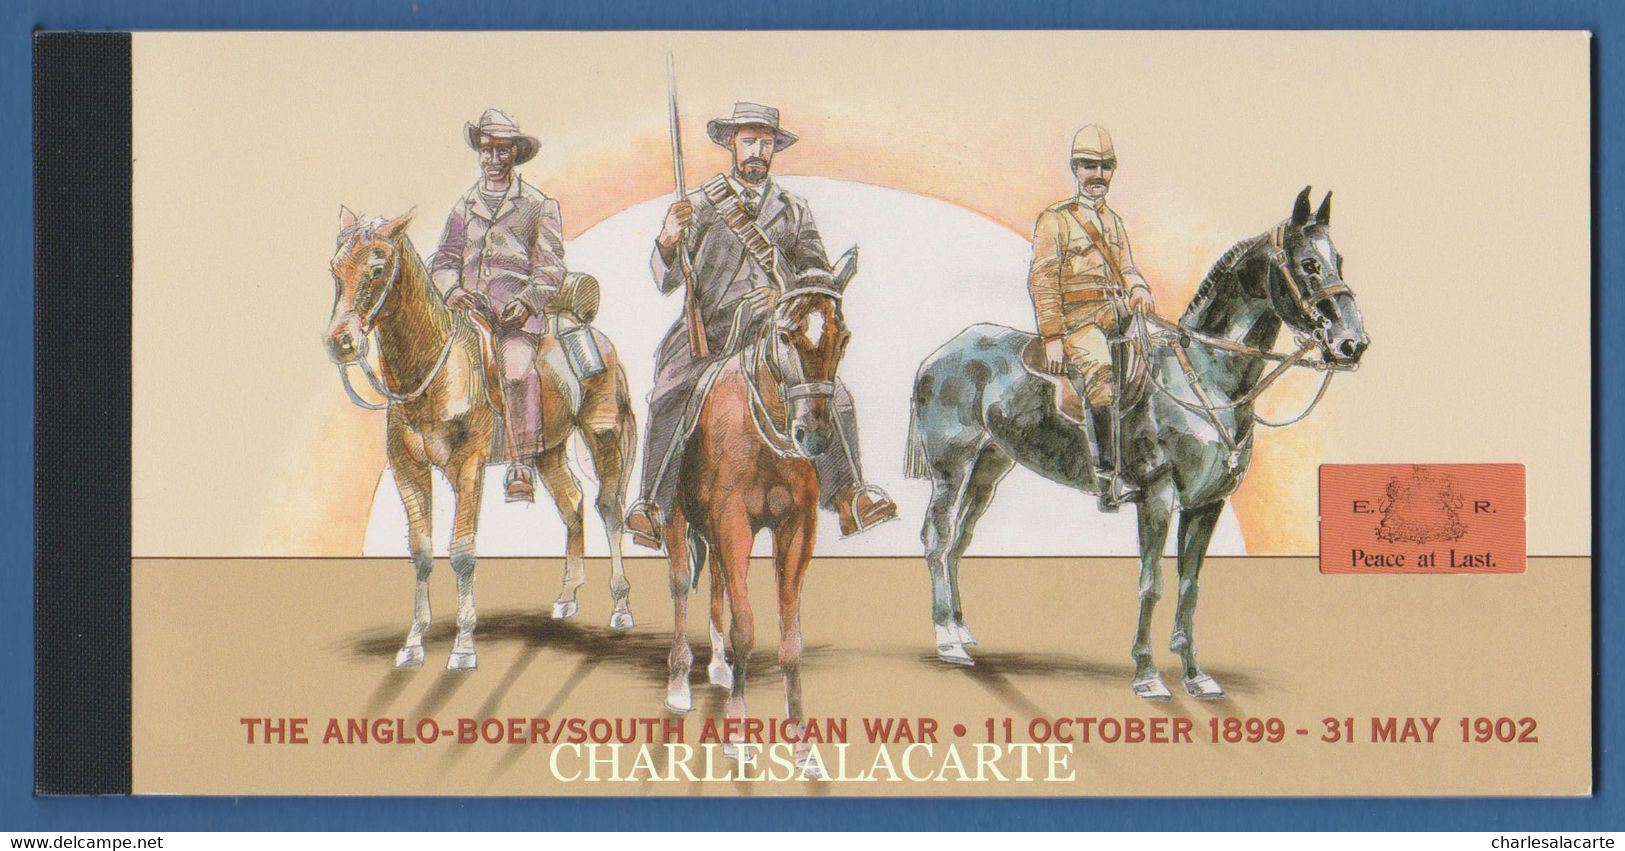 SOUTH AFRICA  2002  PRESTIGE BOOKLET  END OF ANGLO-BOER WAR  S.G. SP 4   SACC 55 - Libretti